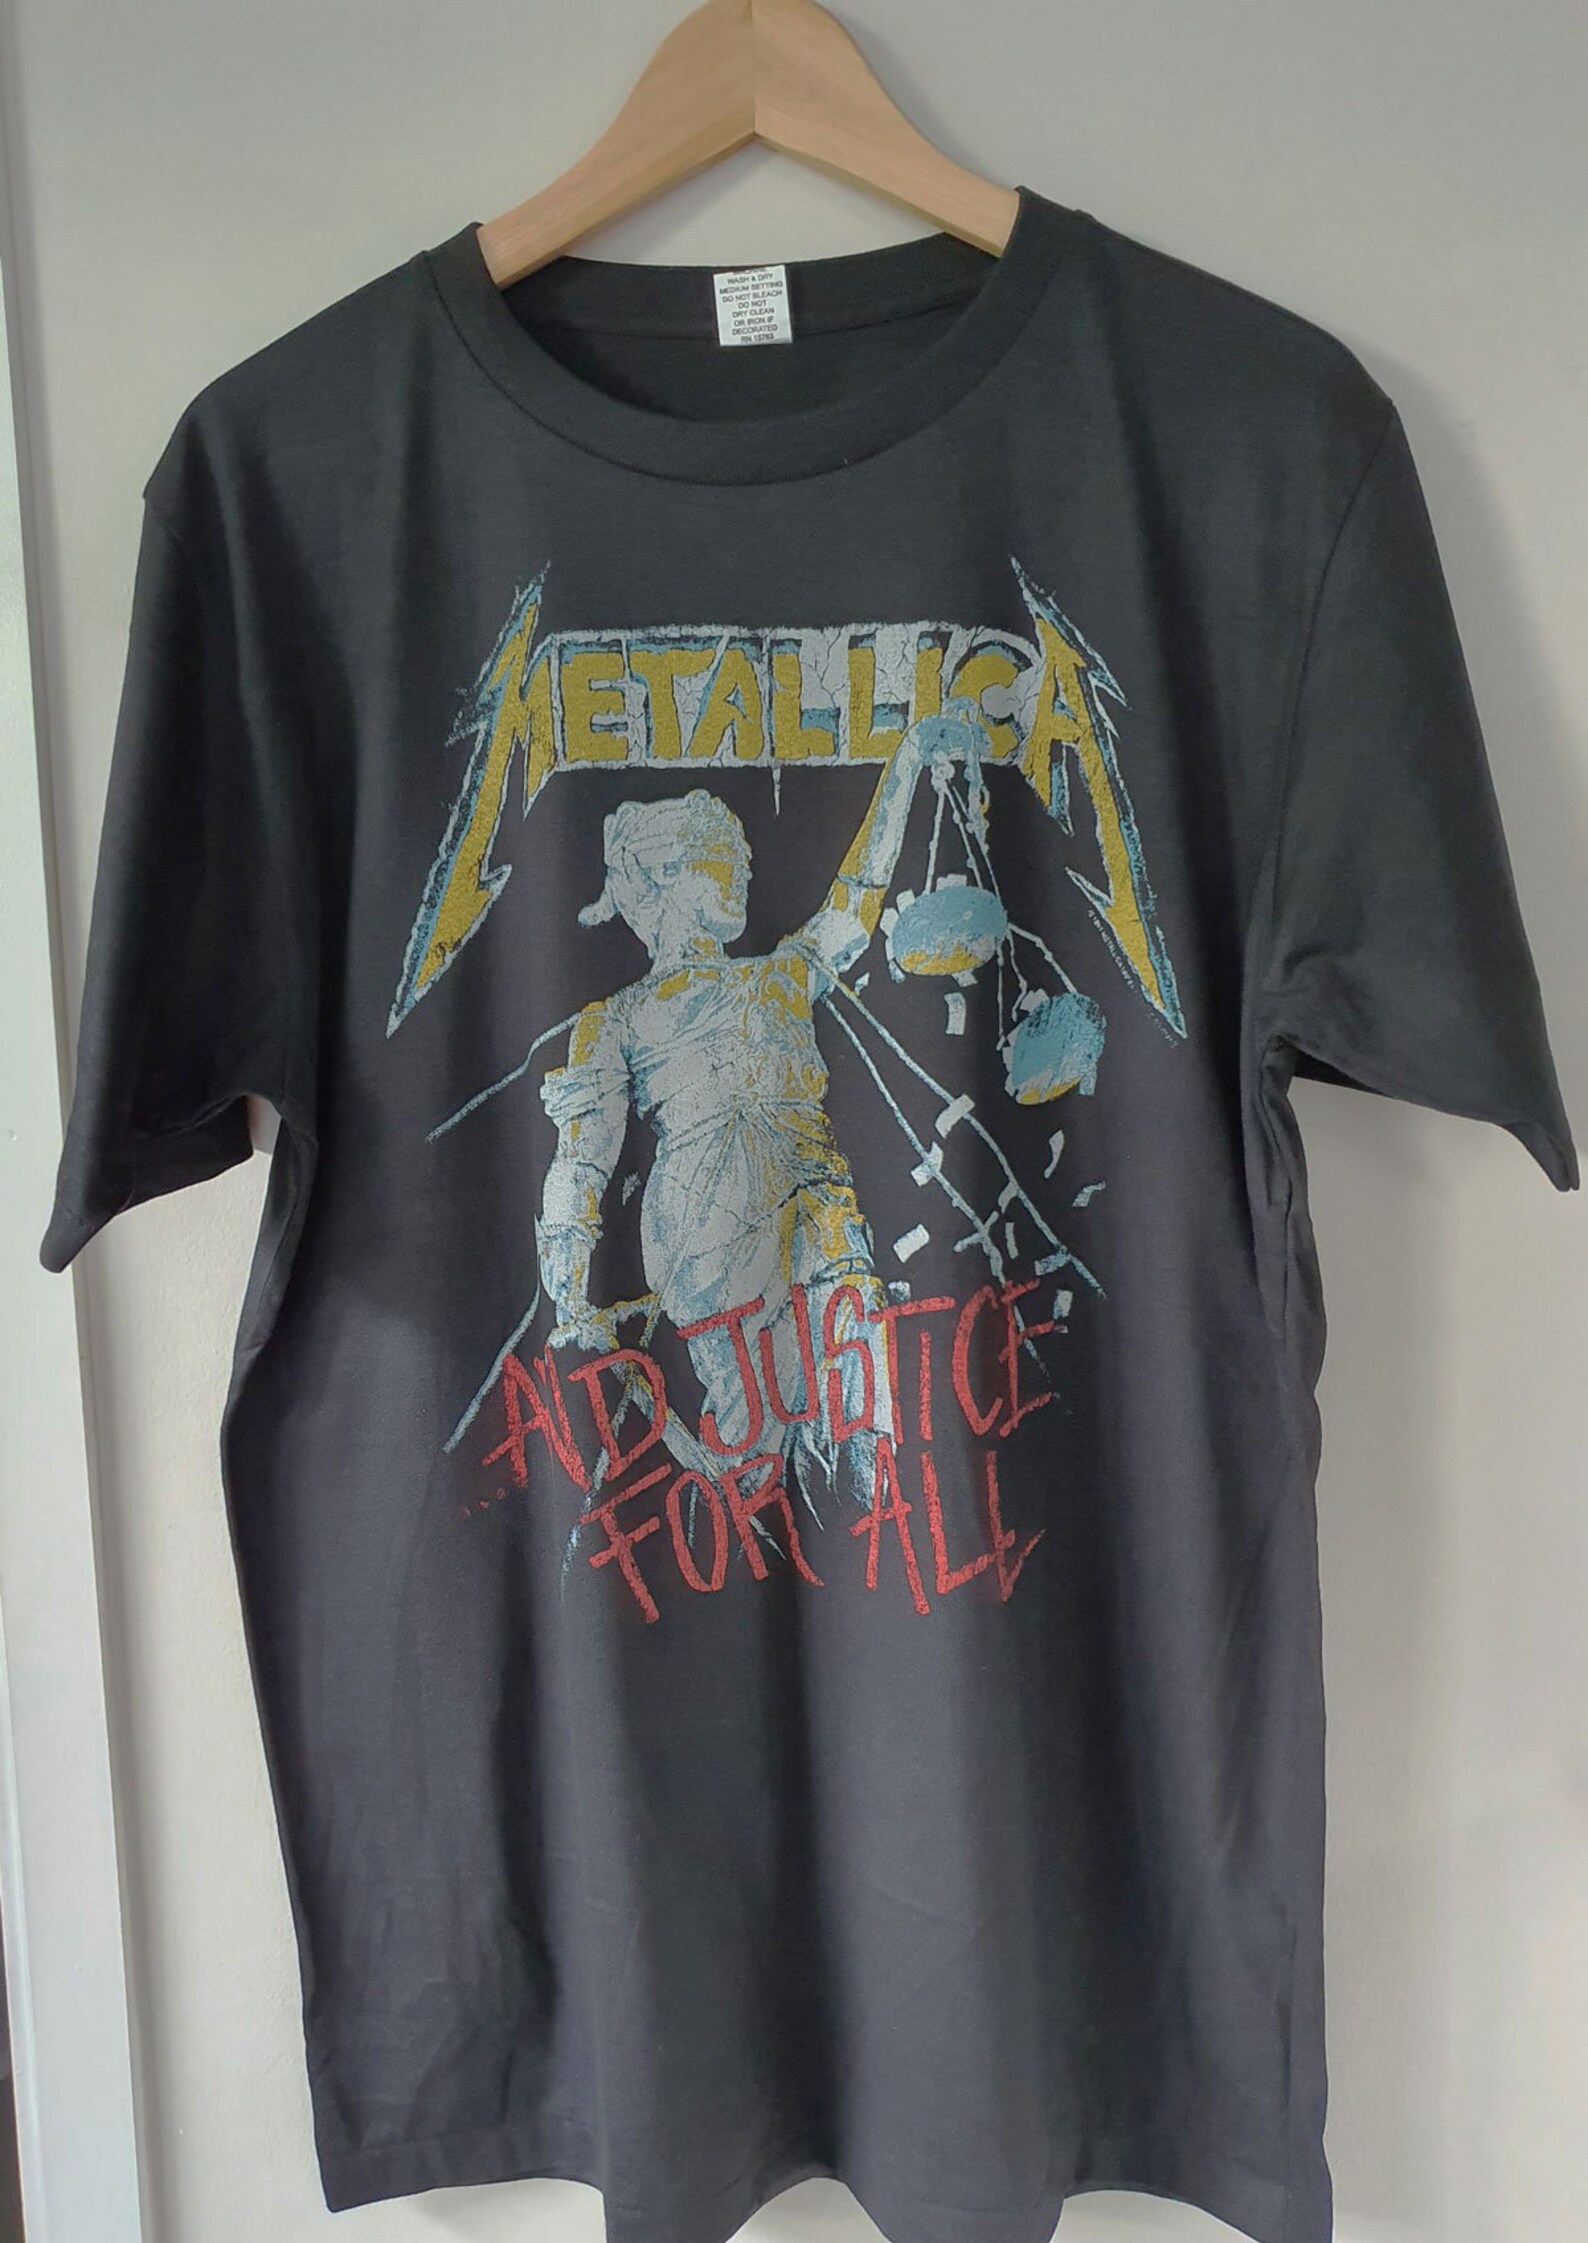 Metallica Justice For All Vintage Look T shirt XL Size | Etsy